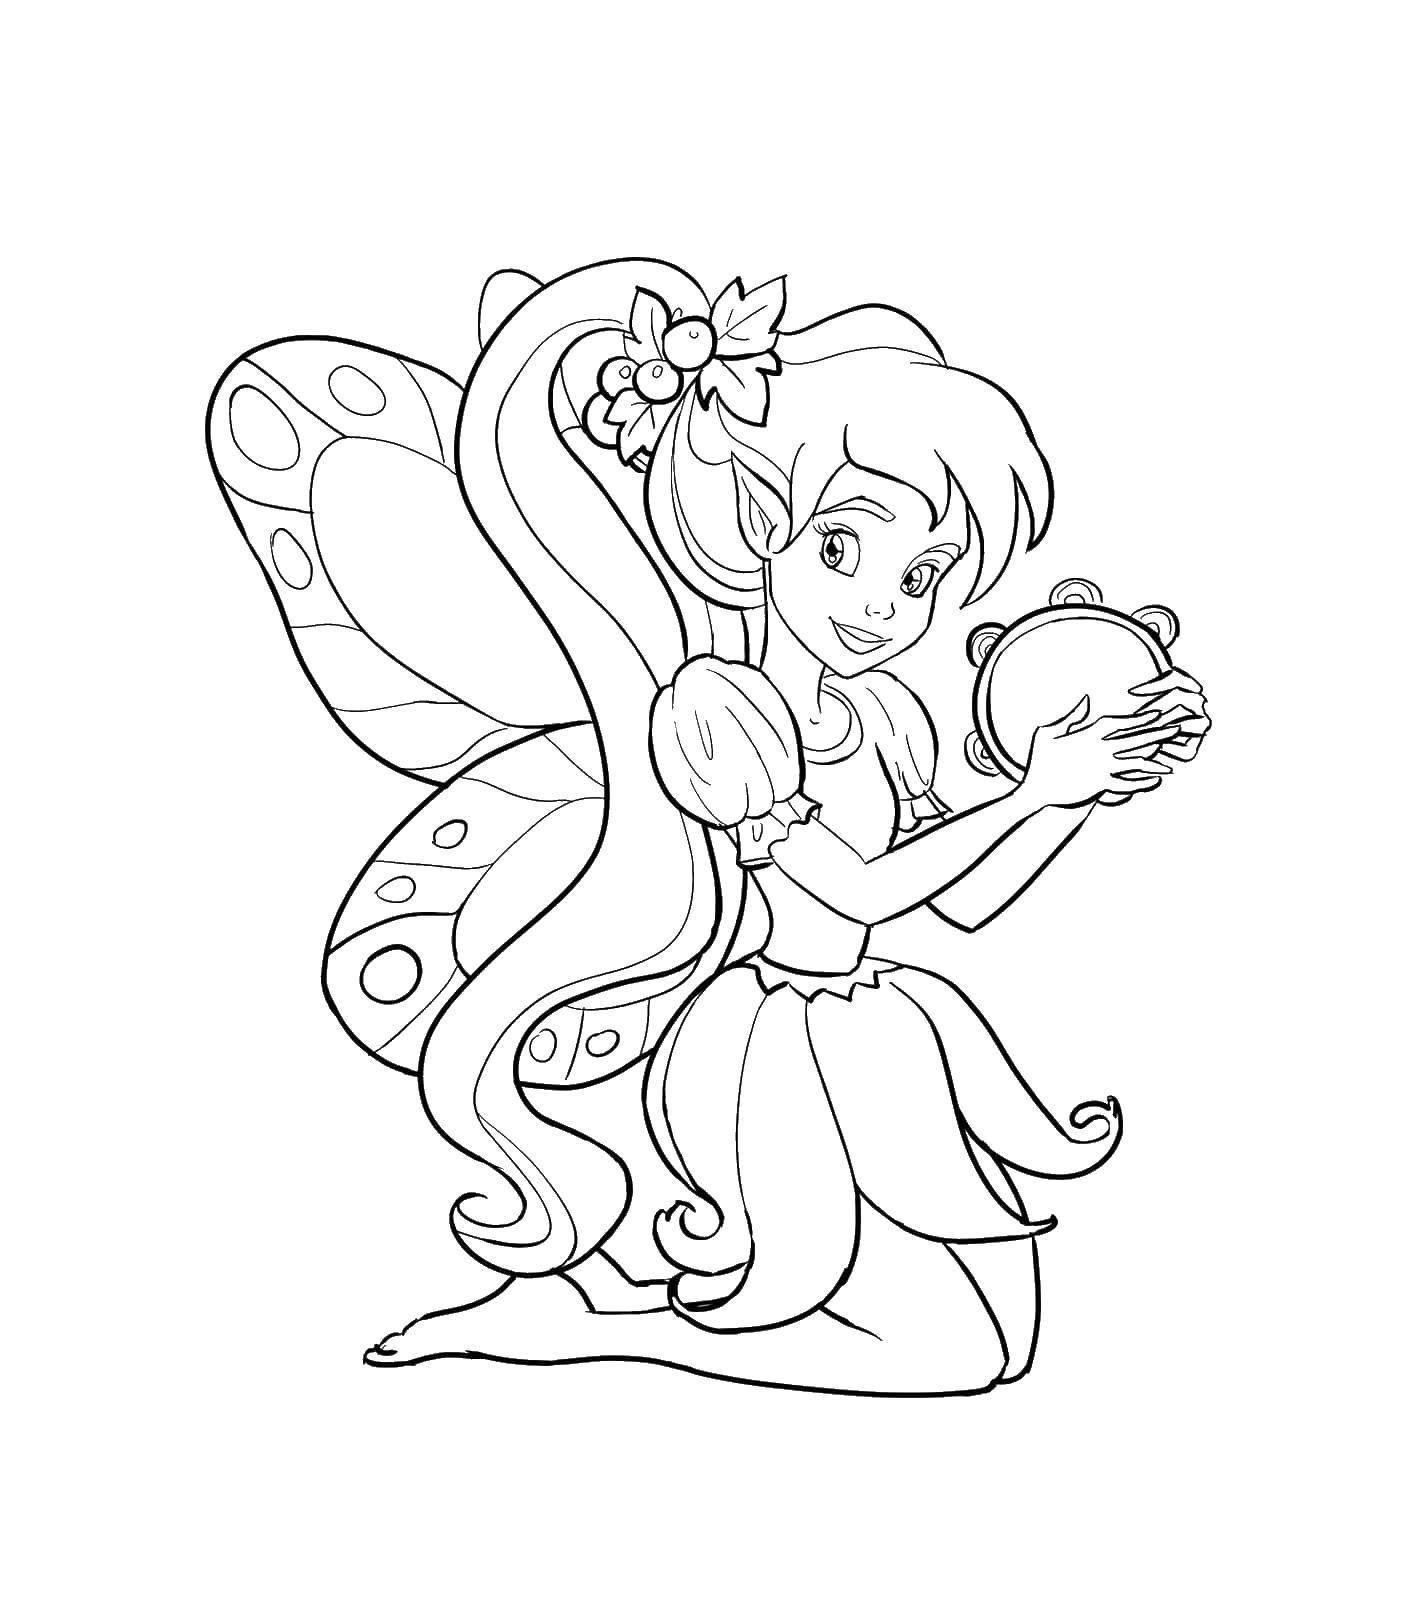 Coloring Fairy tambourine. Category fairies. Tags:  Fairy, forest, fairy tale.